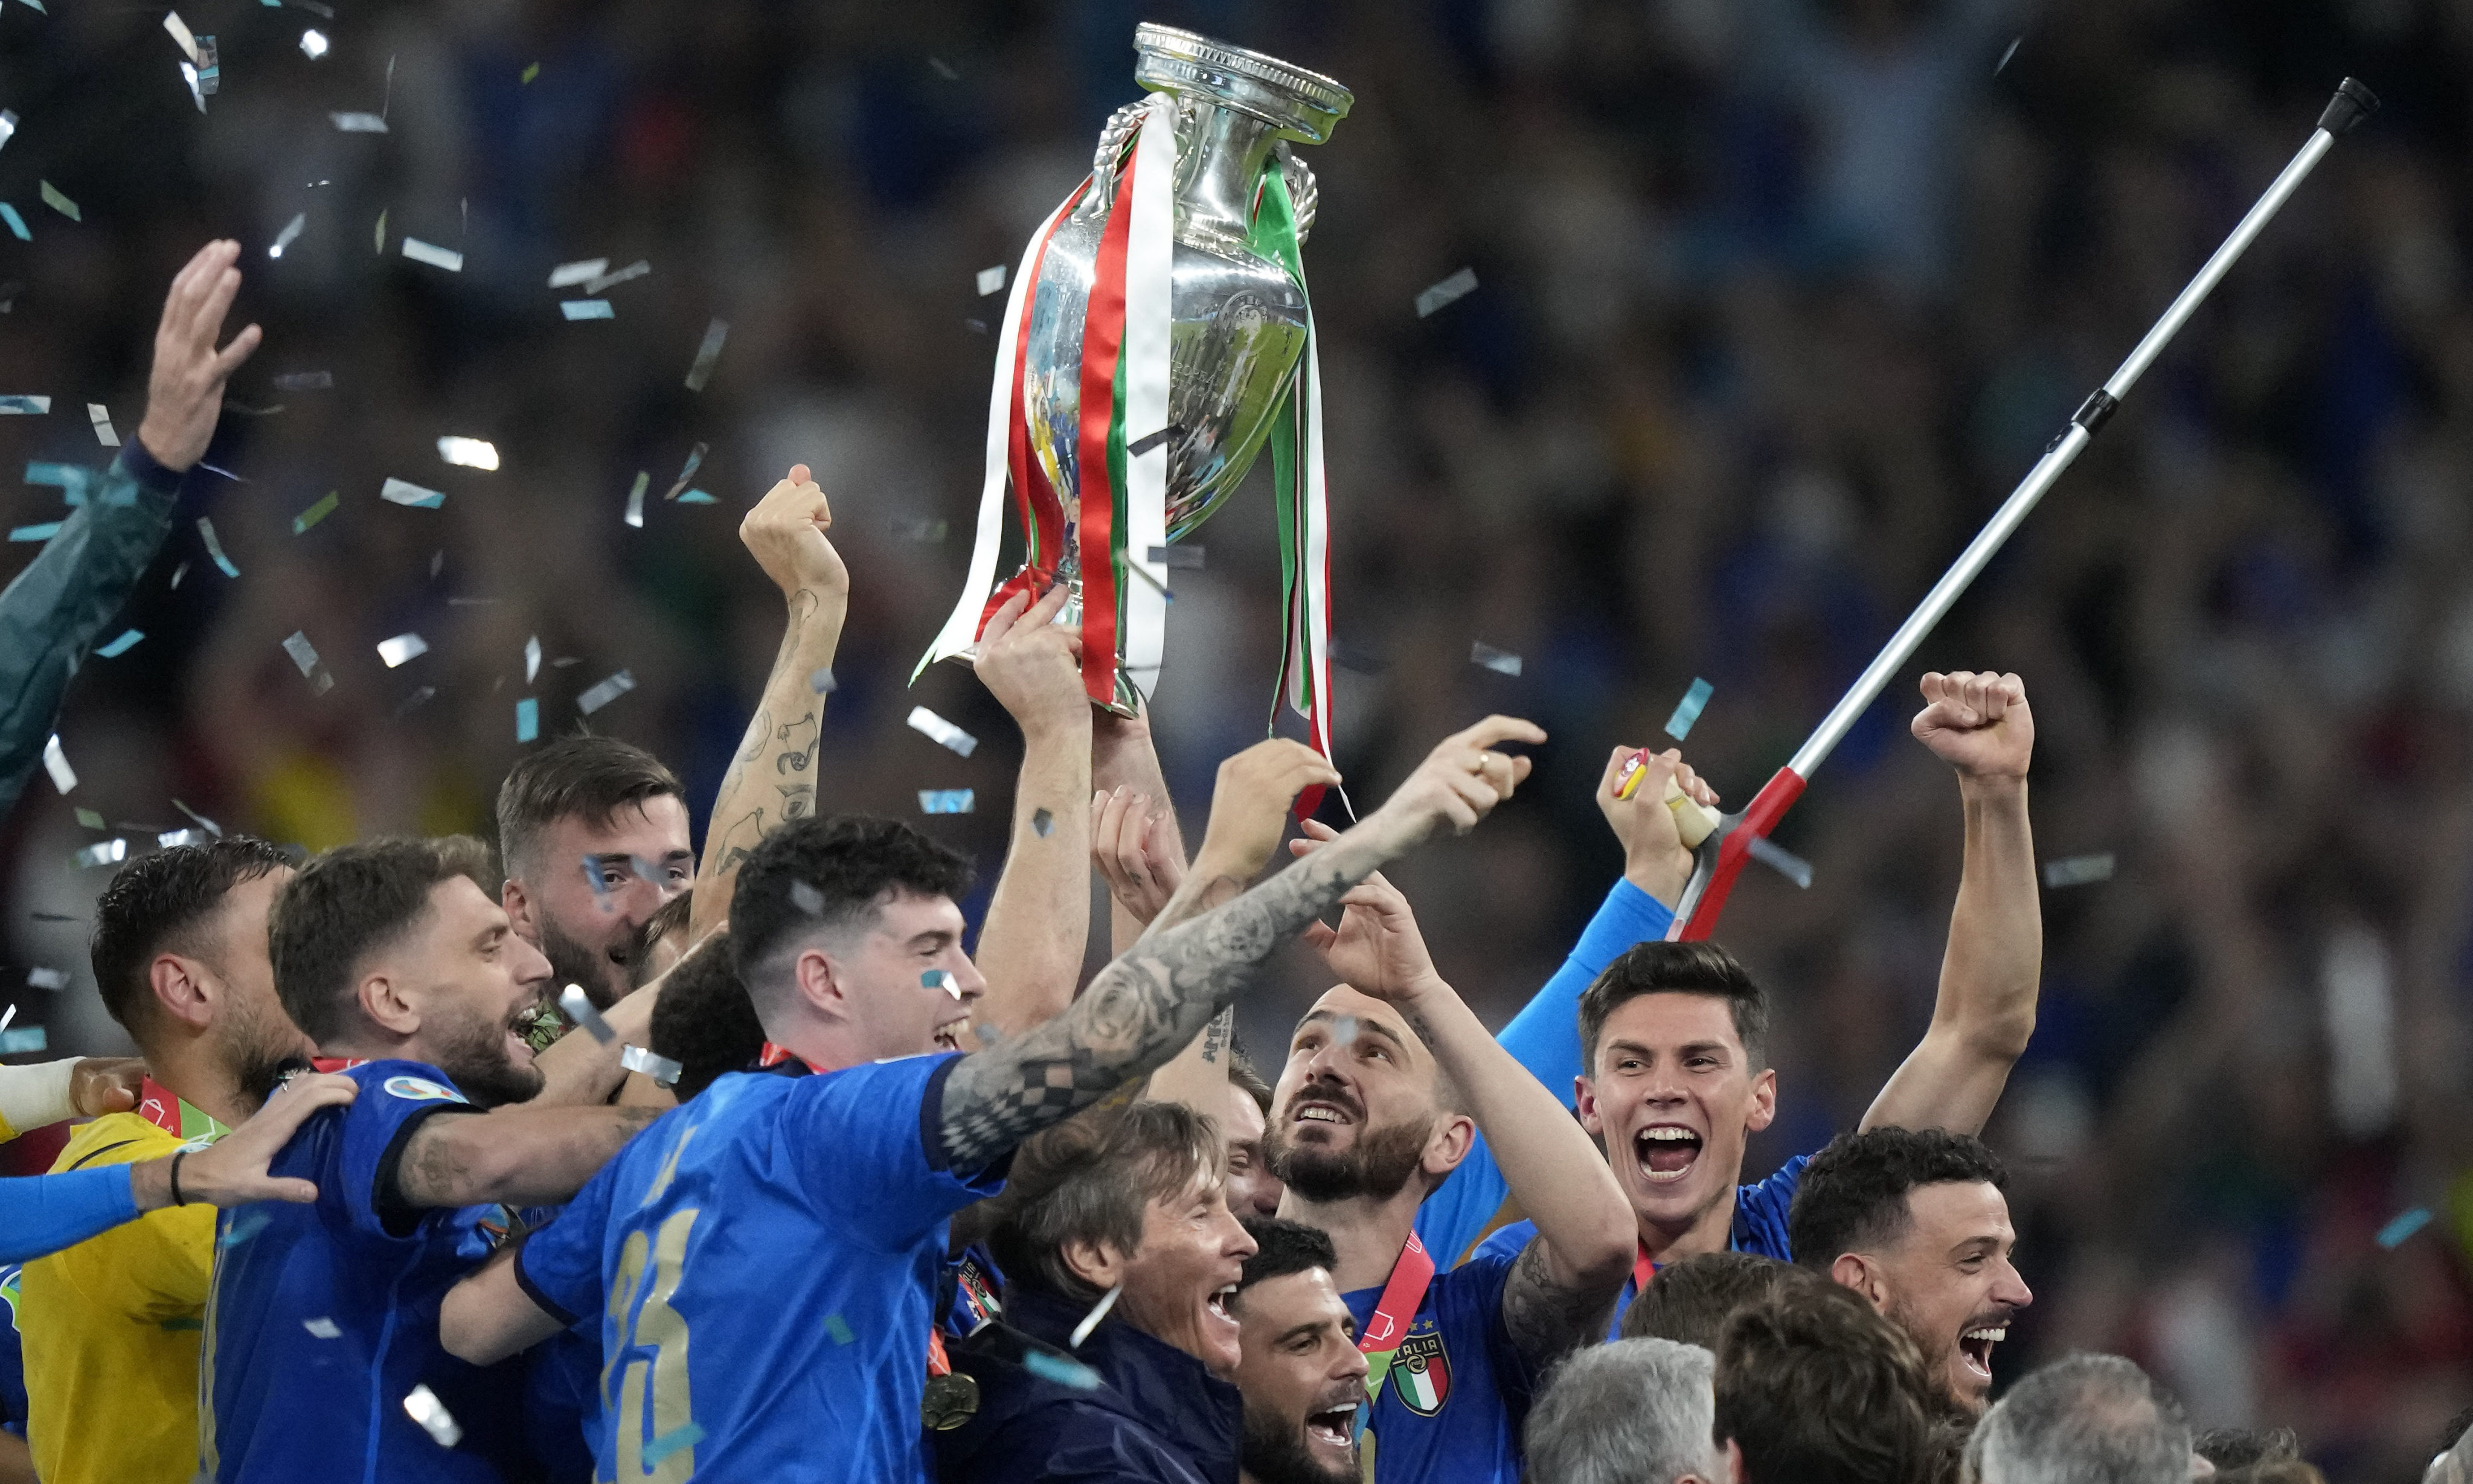 Euros holders Italy will be looking to defend the trophy they claimed three years ago. Photo: AP